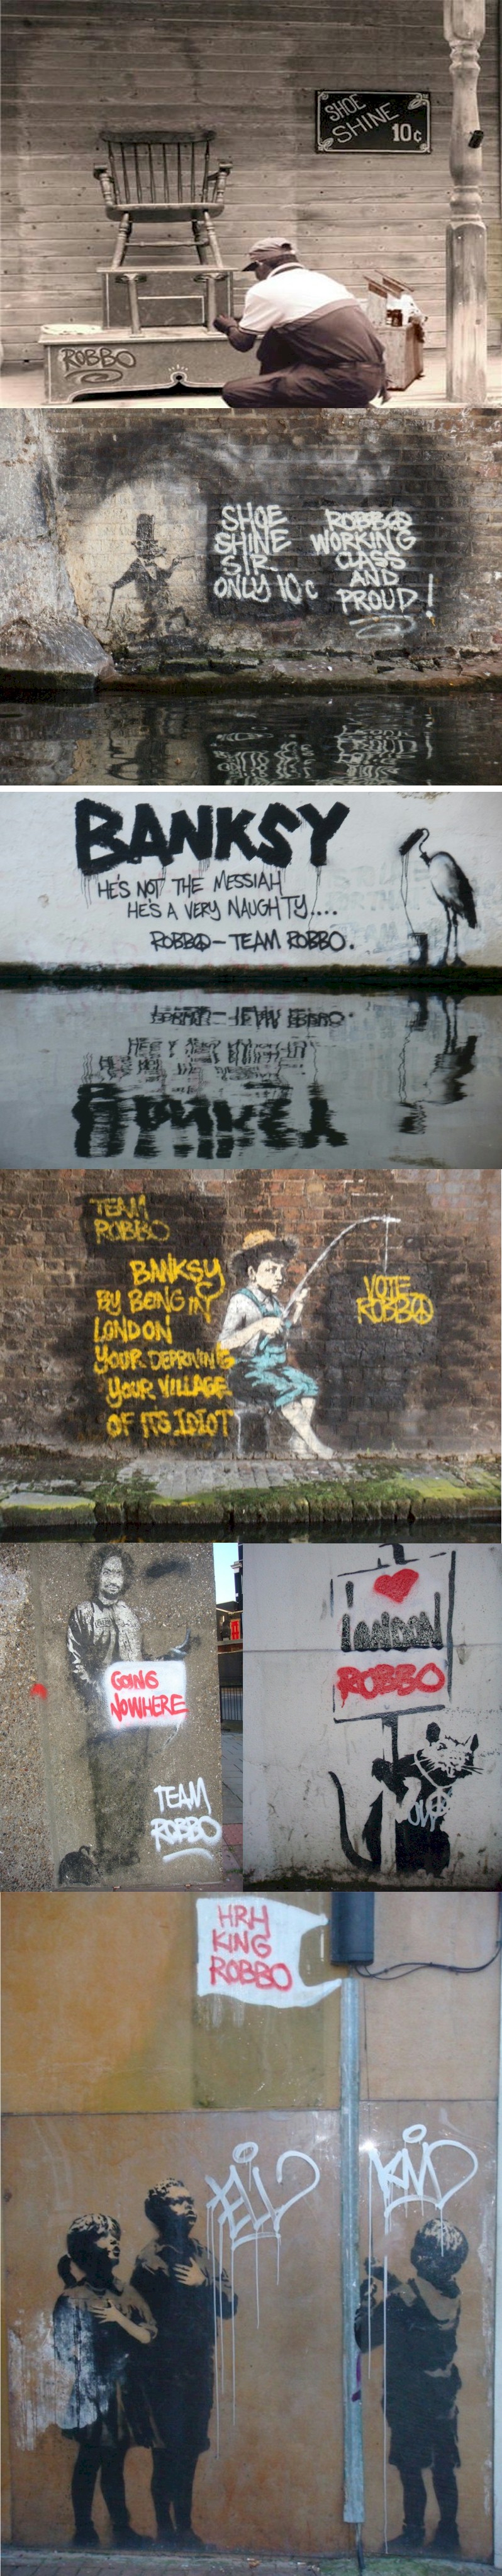 It seems the feud between Banksy and Robbo is far from over as more modifications to Banksys stencil pieces have appeared accross London. The feud sparked by Banksys mural in Camden where he painted over a vintage Robbo piece. Banksys mainstream success has taken the Bristol artist to great lengths in recent years, having works sold at major auctio